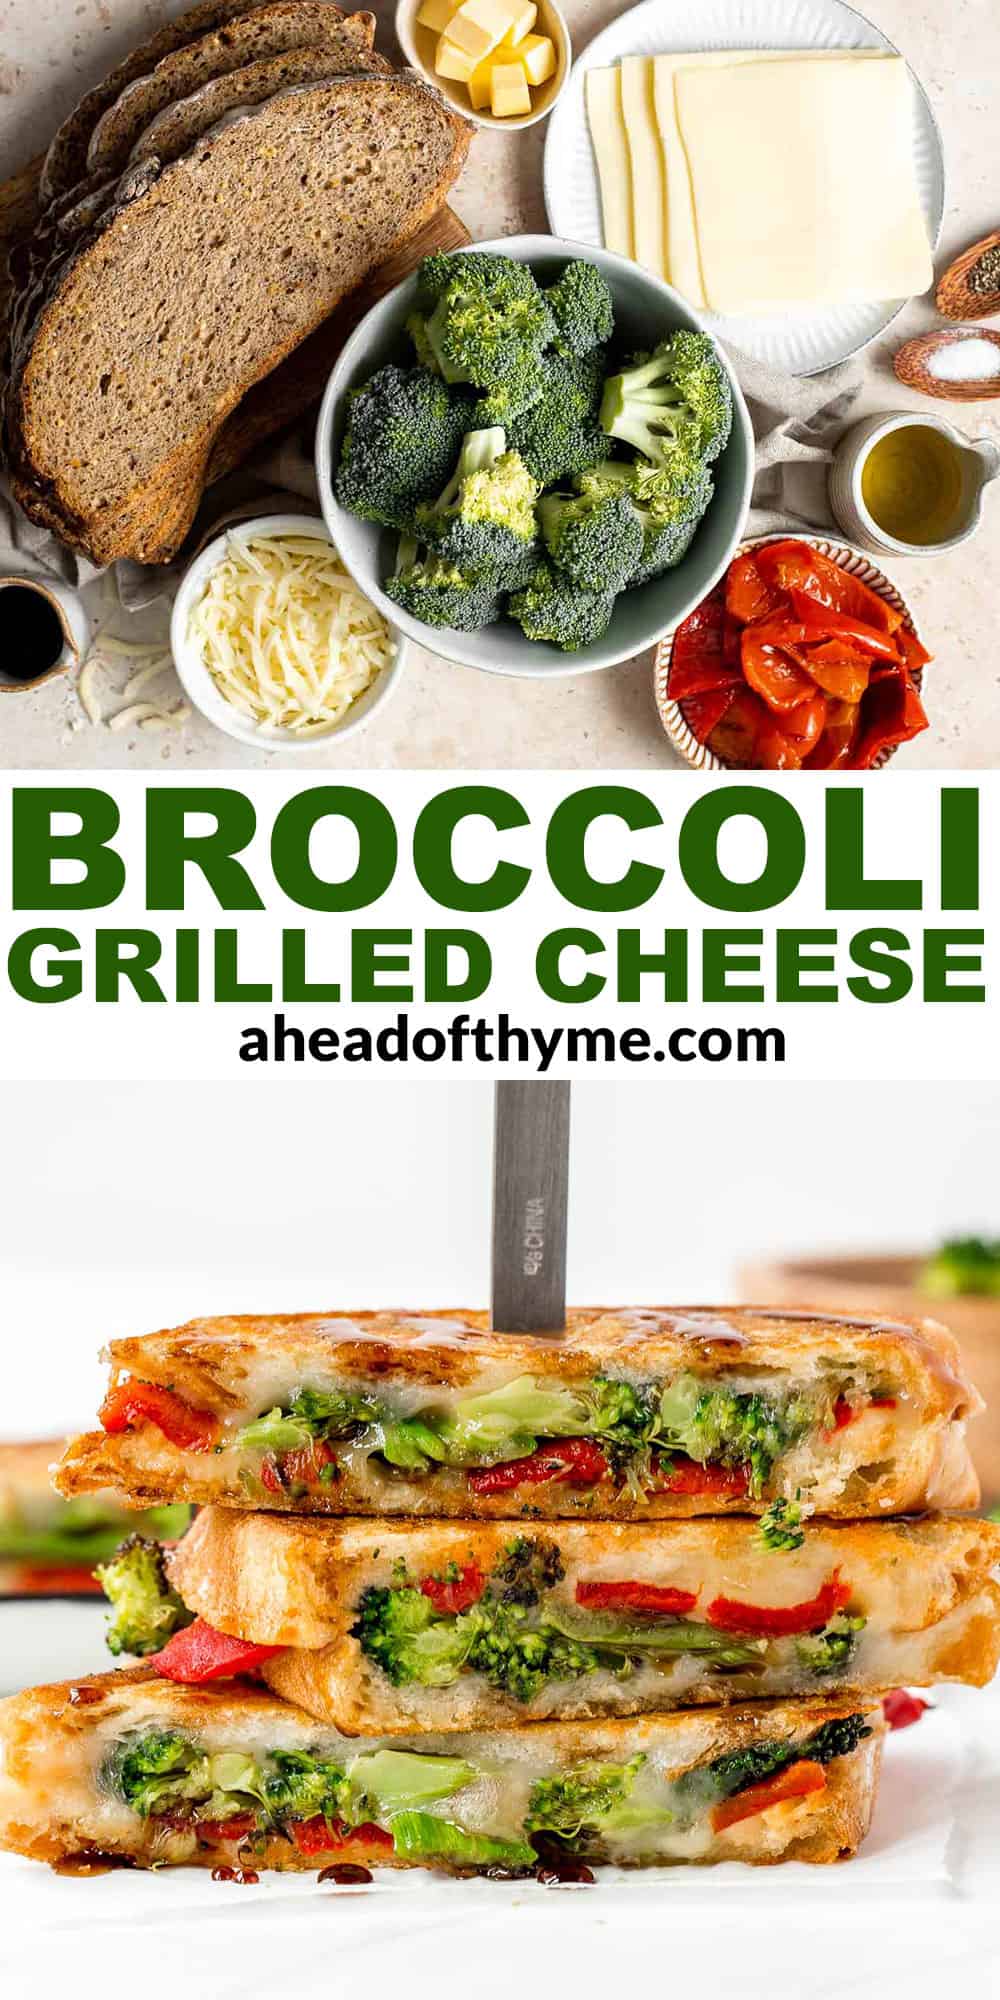 Take your grilled cheese game to the next level with Roasted Broccoli Grilled Cheese Sandwich made with broccoli, red peppers, cheddar, and mozzarella. | aheadofthyme.com